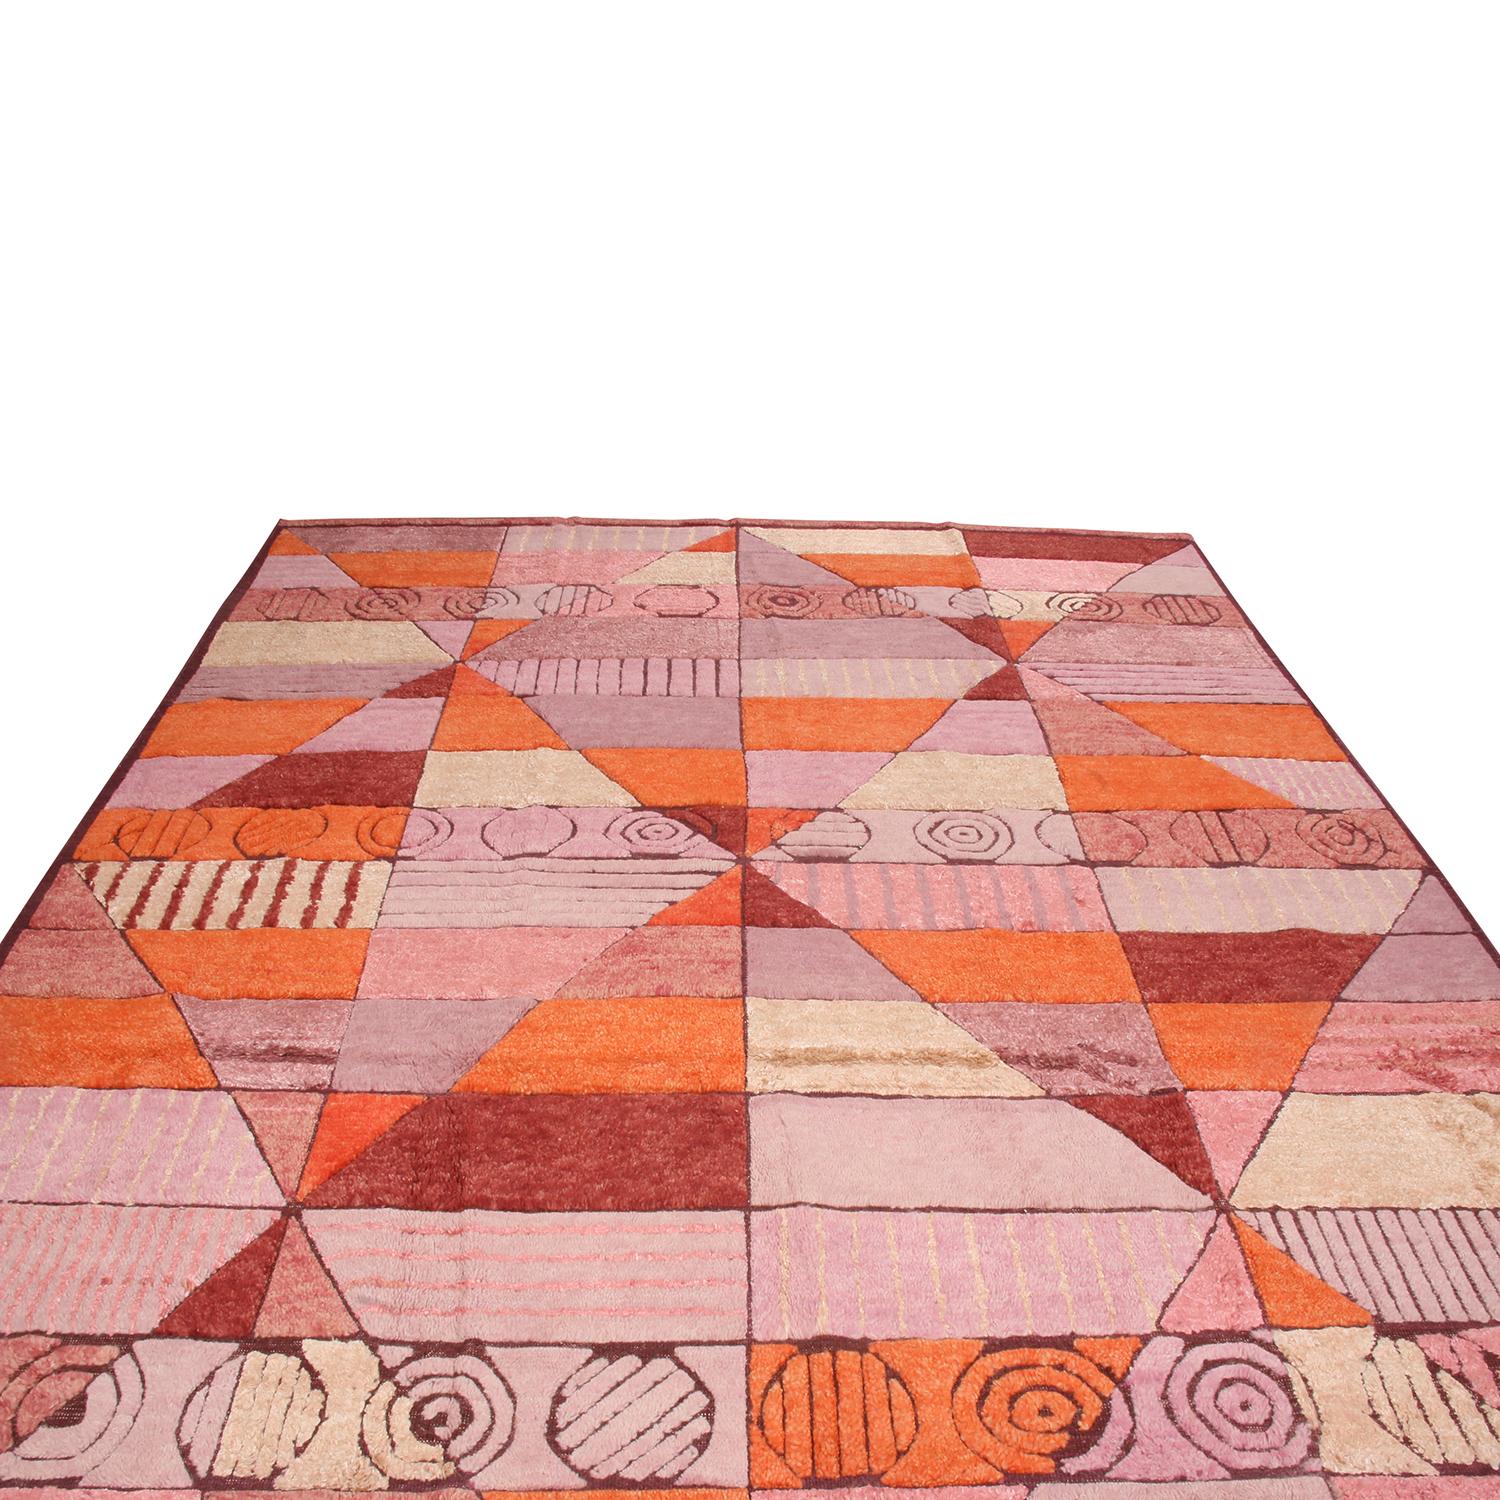 Originating from India, this geometric rug hails from Rug & Kilim’s Scandinavian-inspired collection, blending high-quality pile and flat-woven wool and an inviting mixed pile height with textures complementing the multi-tonal pink, purple, orange,